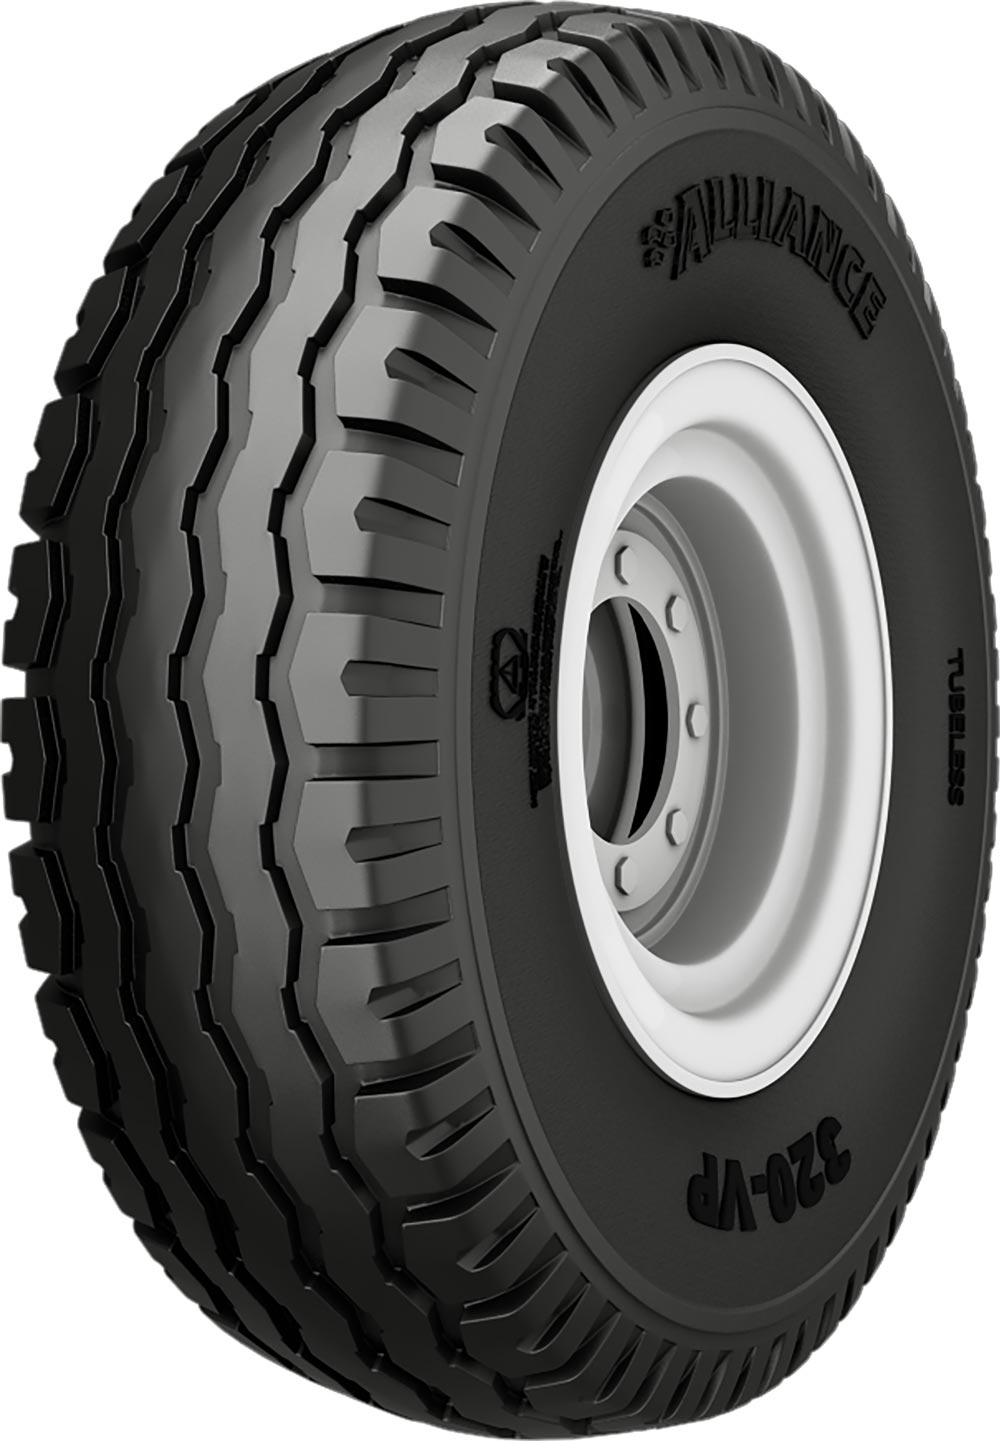 product_type-industrial_tires Alliance 320 VP 14PR TL 500/50 R17 500A